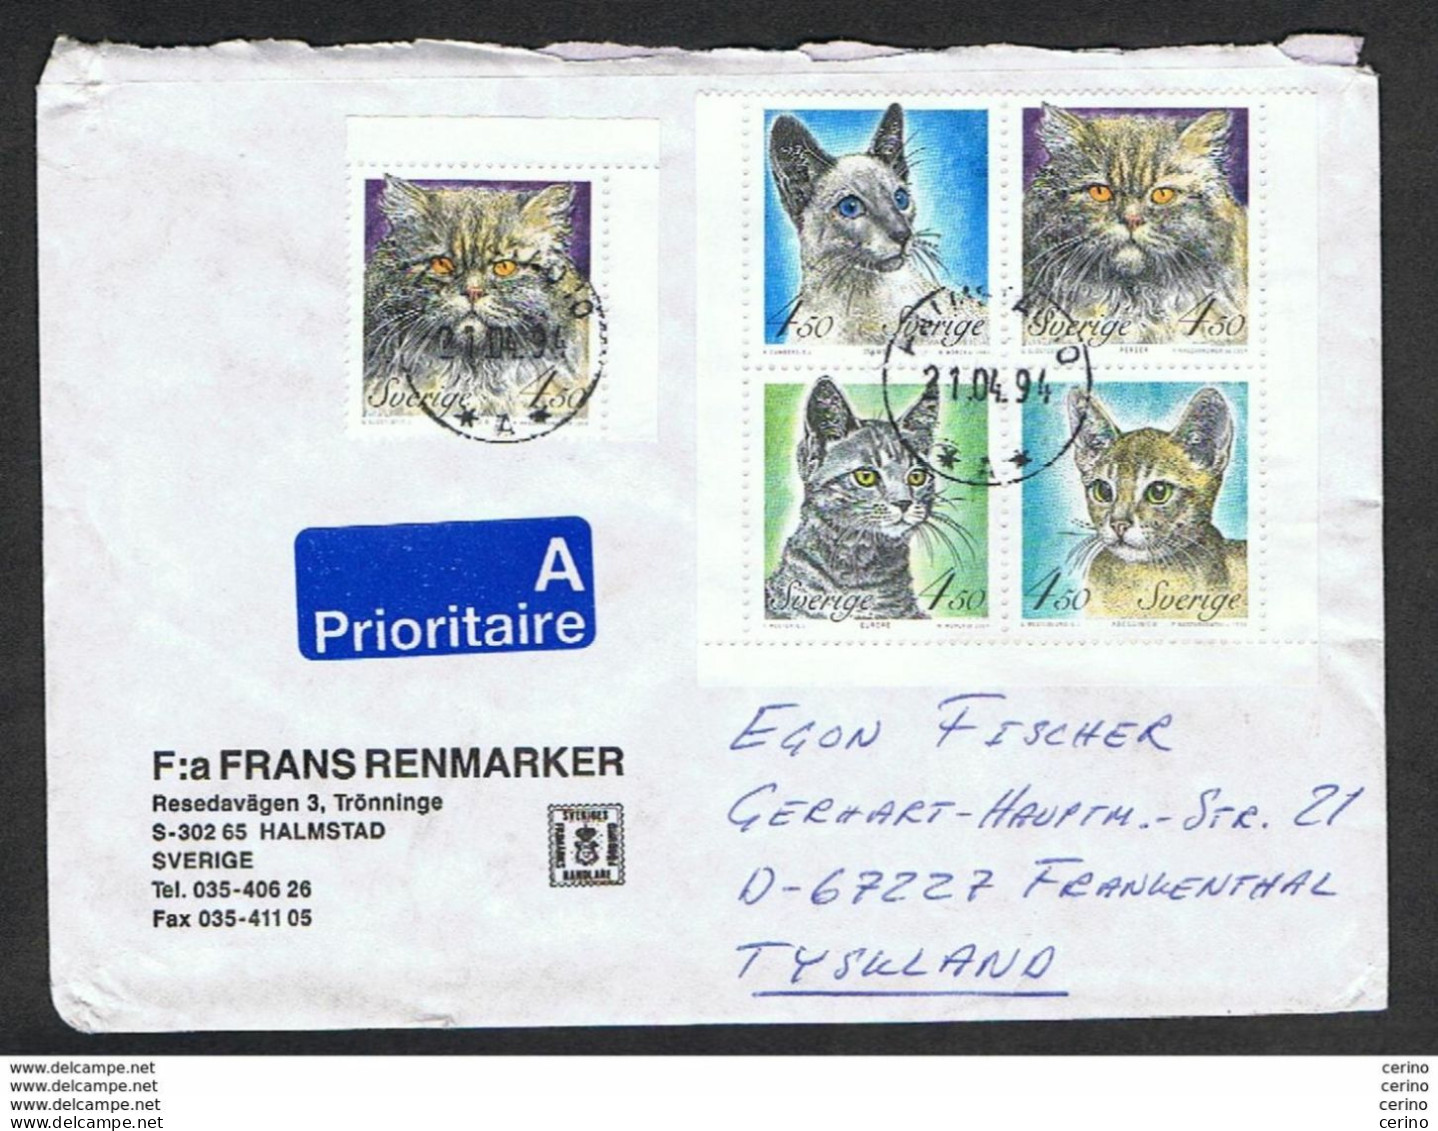 SWEDEN: 1994 PRIORITY COVERT WITH CATS 5 VAL. (1800/03) - TO GERMANY - Covers & Documents